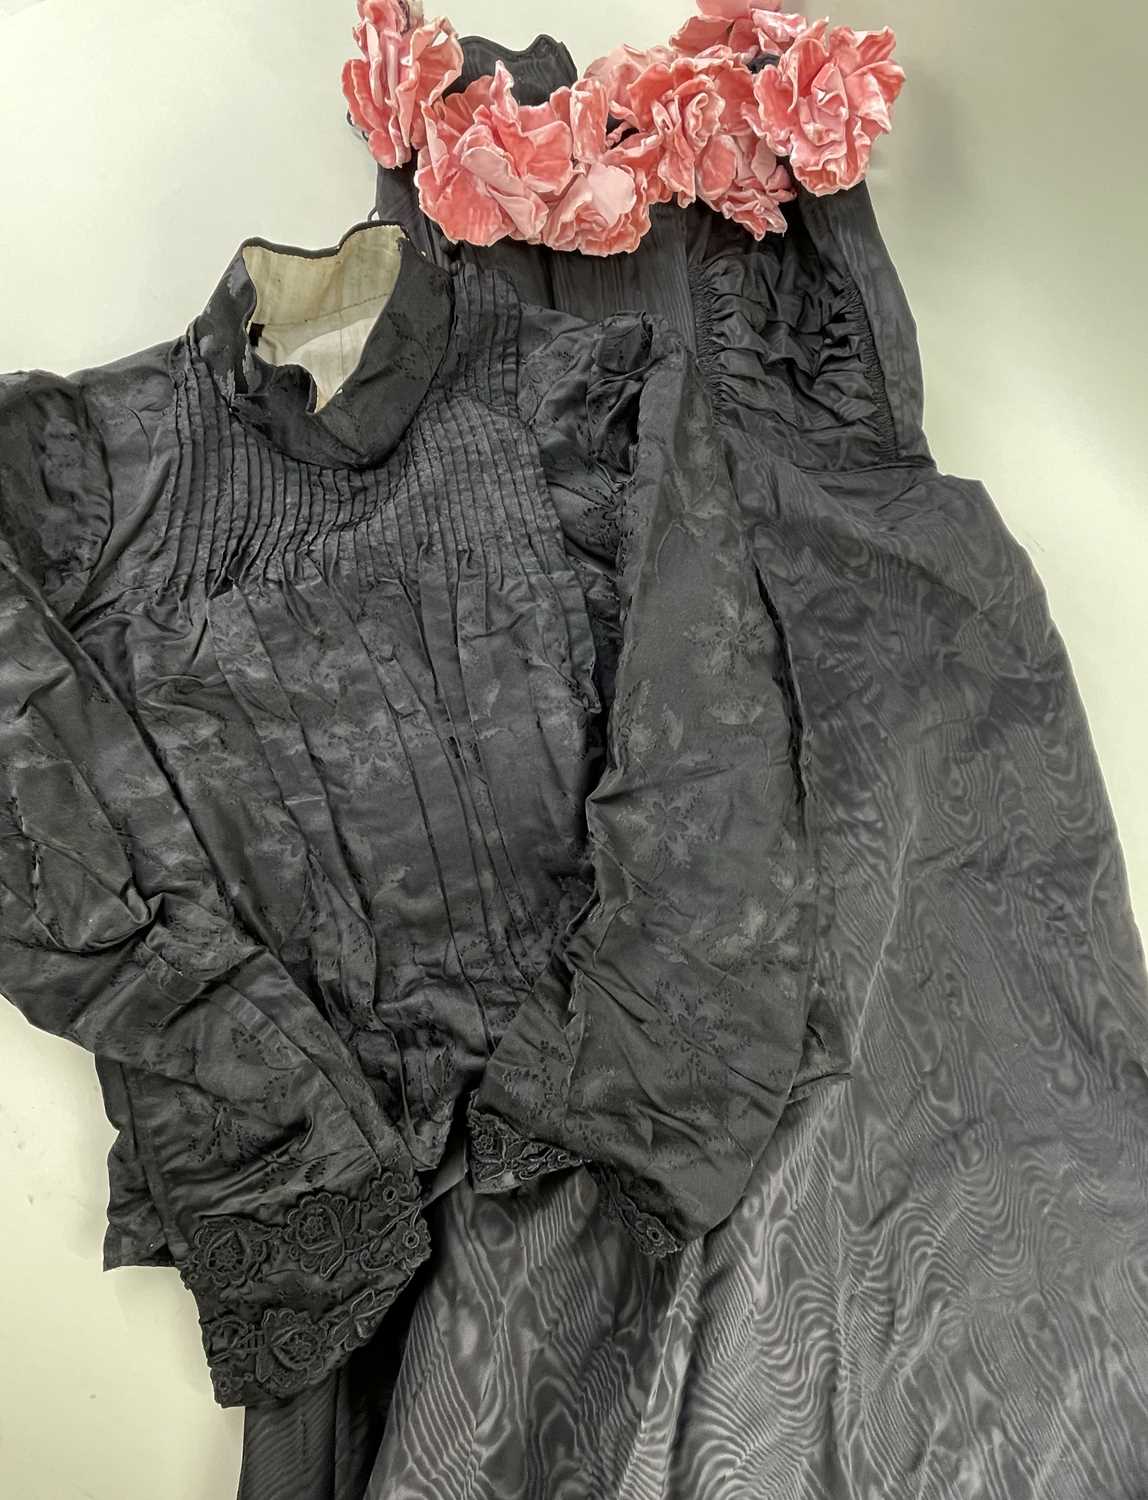 VICTORIAN BLACK BODICE, SATIN DRESS, & JAPANESE-STYLE CREPE 'KIMONO' GOWNS, the dress with watersilk - Image 5 of 23